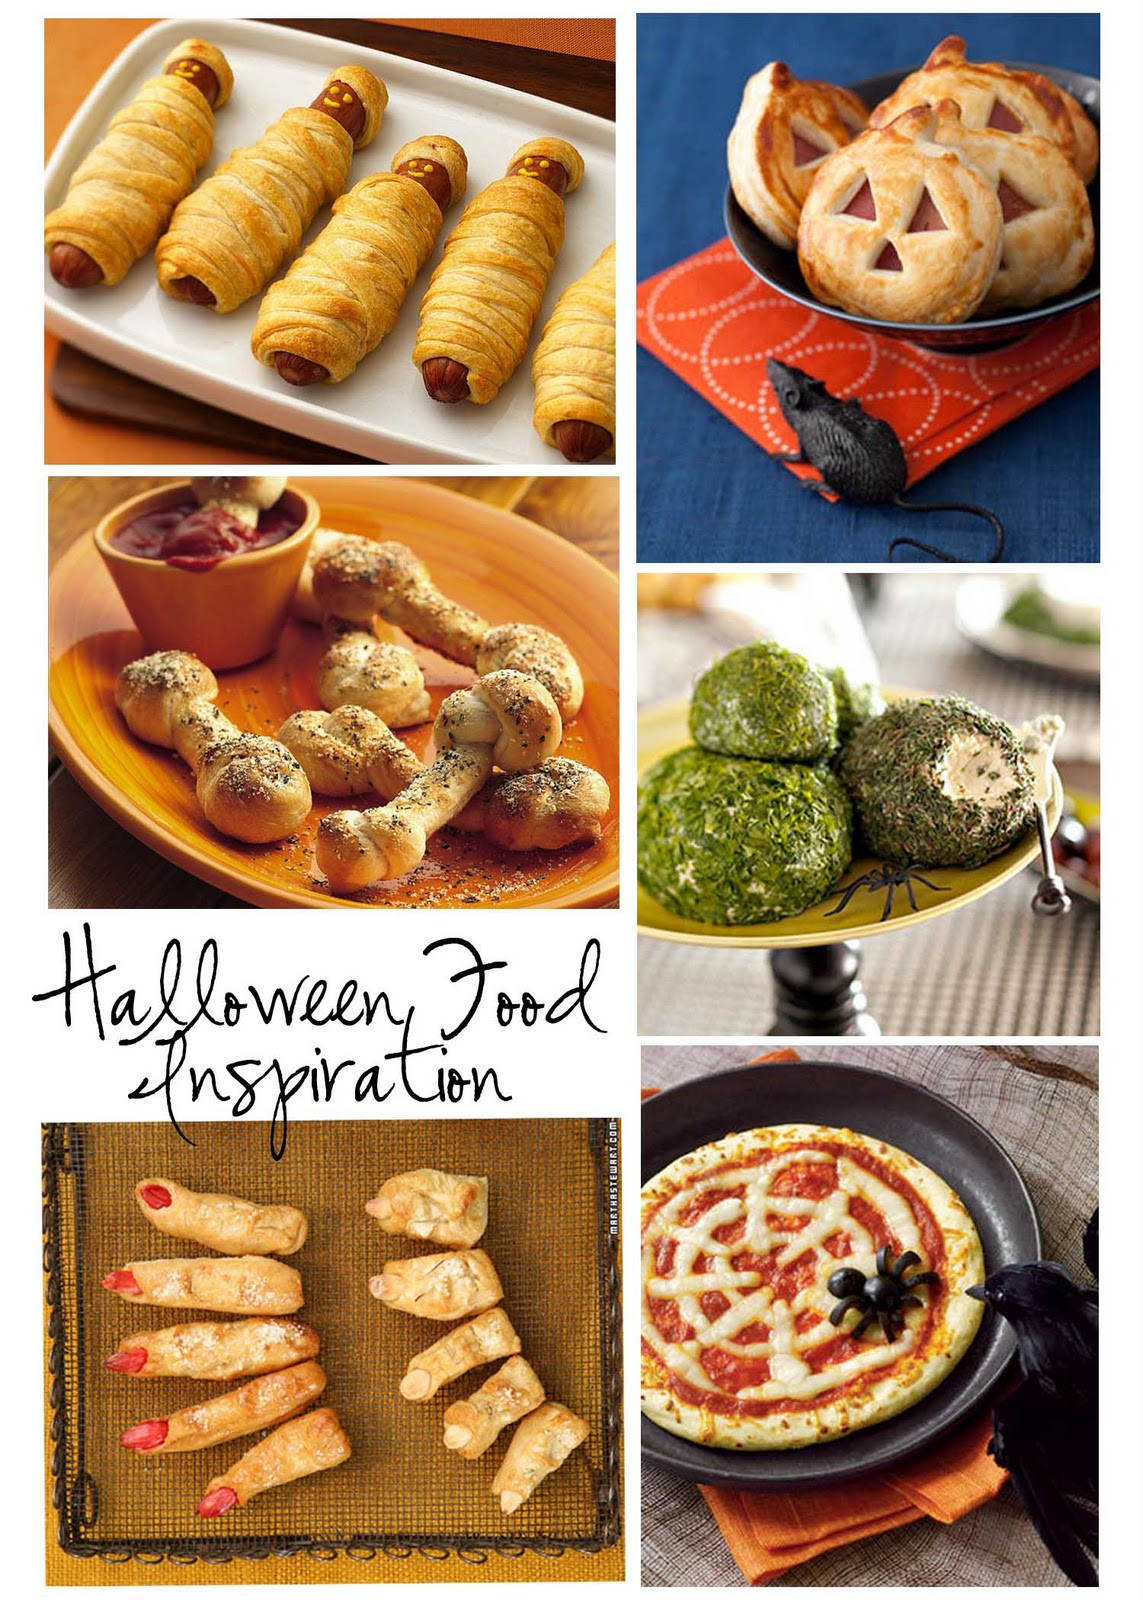 Food Halloween Party Ideas
 Room to Inspire Spooky Food Ideas